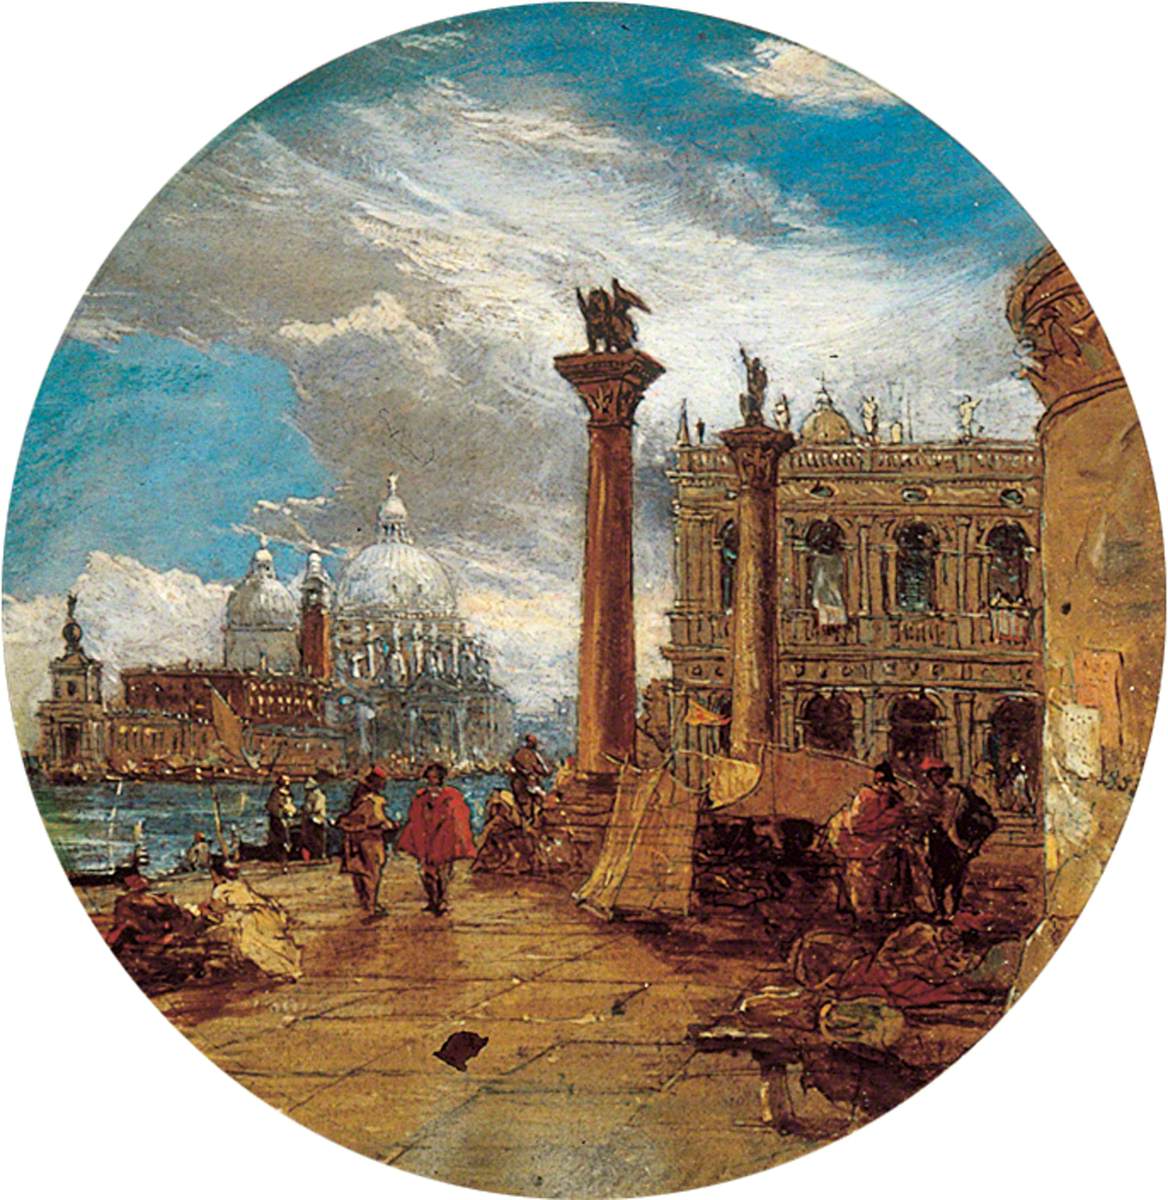 The Piazzetta of St Mark's, Venice